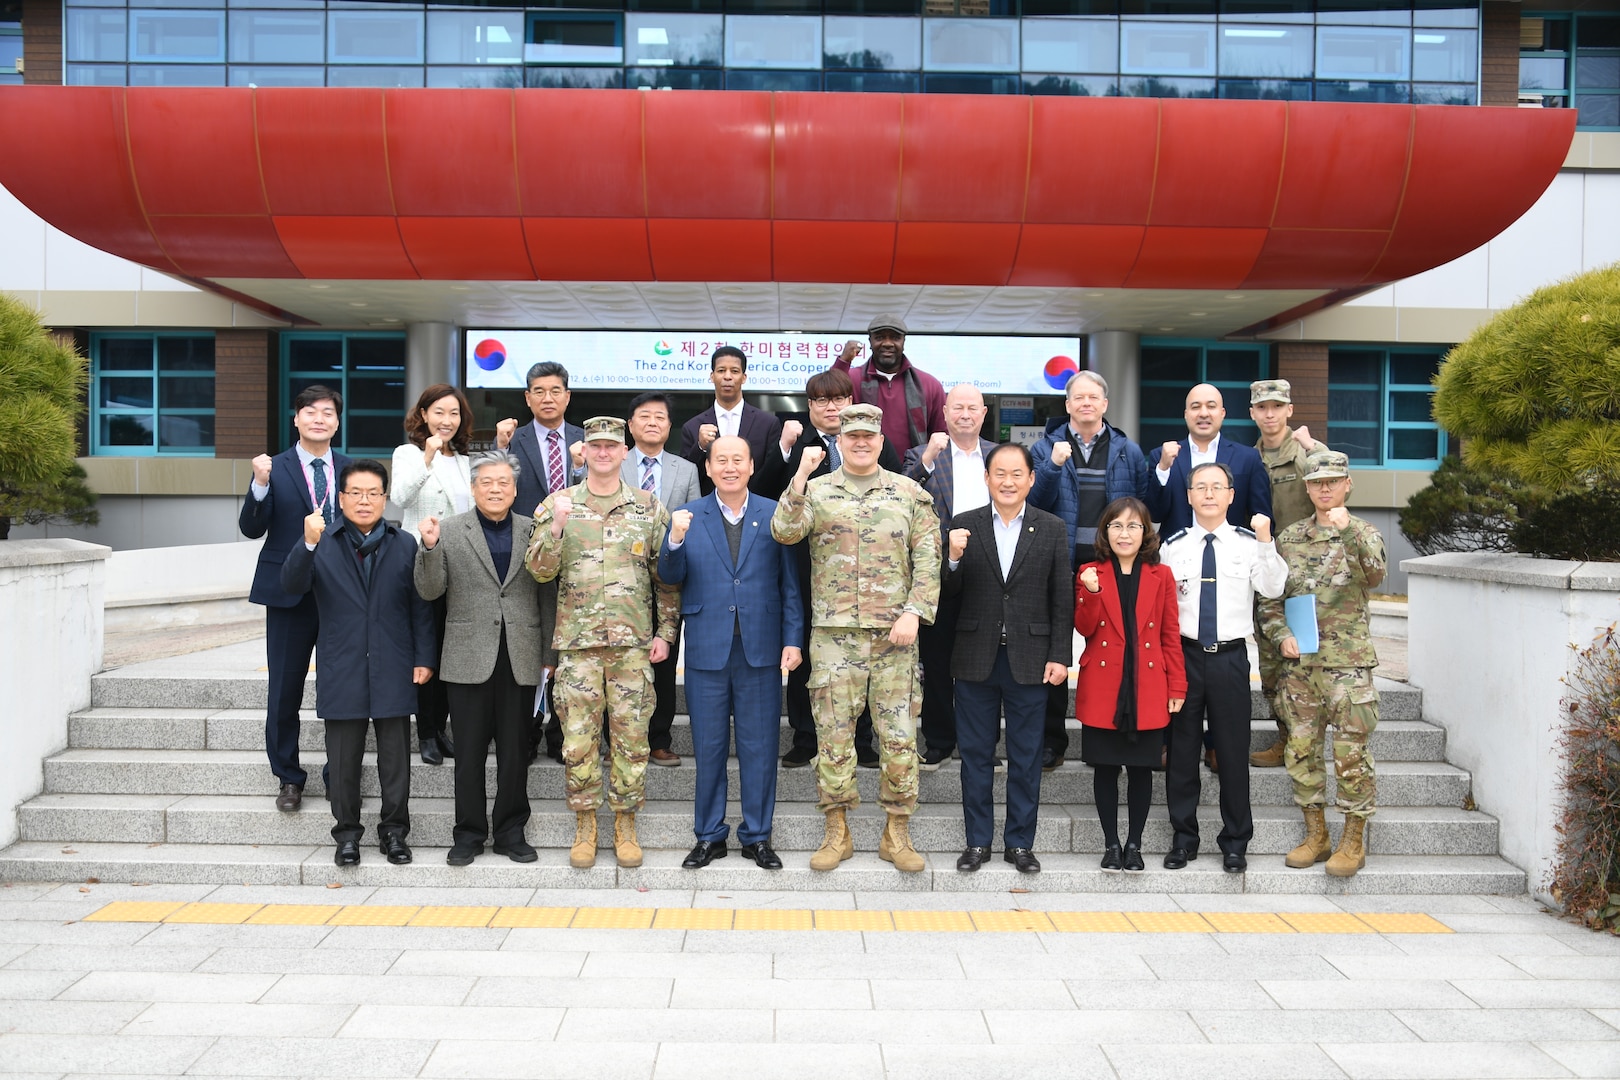 South Korea - Dongducheon City Mayor Park Hyeon-deok and United States Army Garrison (USAG) Yongsan-Casey Commander Col. Lloyd Brown co-chaired the second Korean-American Cooperation Council hosted at Dongducheon City Hall, Dec. 6. The goal of the Dongducheon/USAG Yongsan-Casey council is to promote cultural exchanges, cooperation and generate mutual understanding between both communities, together with the U.S. Forces Korea and 8th Army guidance to help strengthen partnerships. (Photo Courtesy by Dongducheon City)